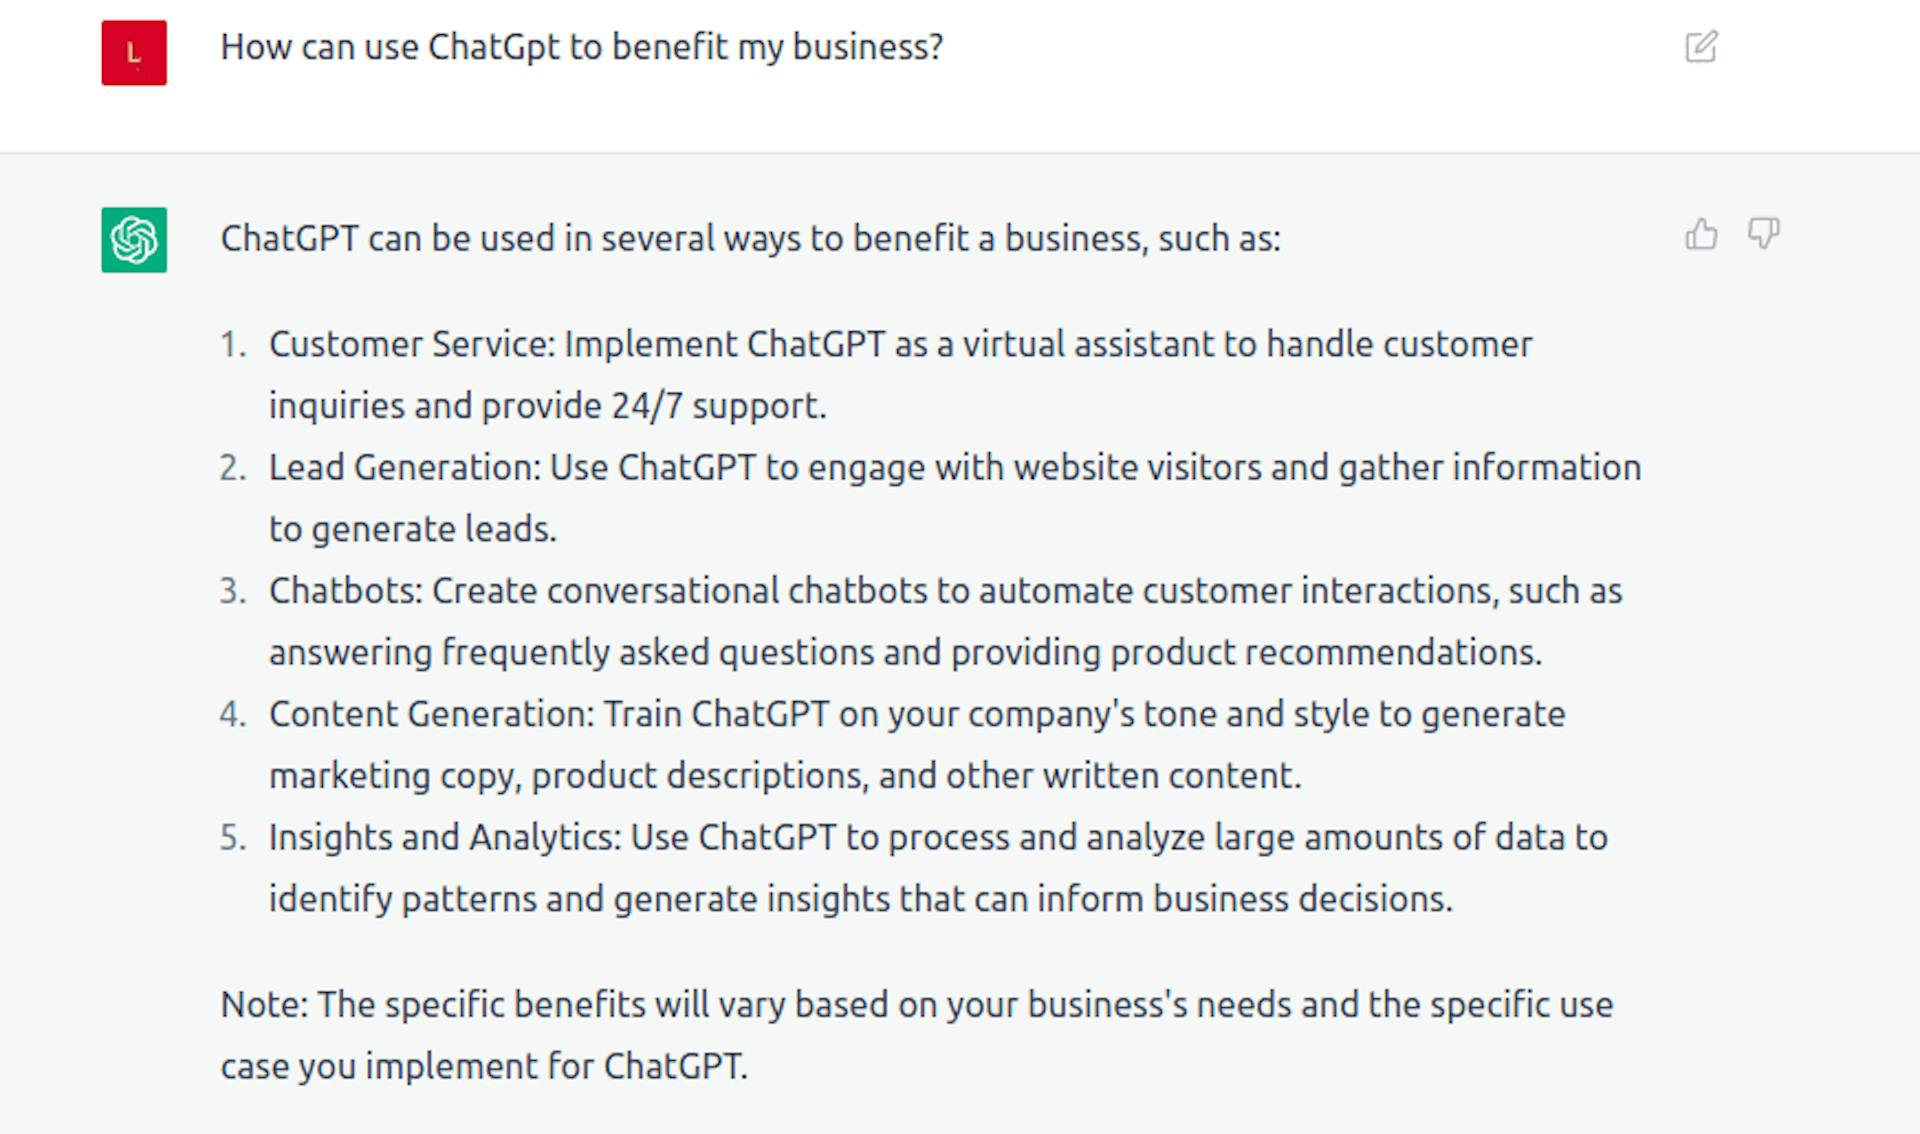 ChatGPT gives advice on how to develop a product strategy